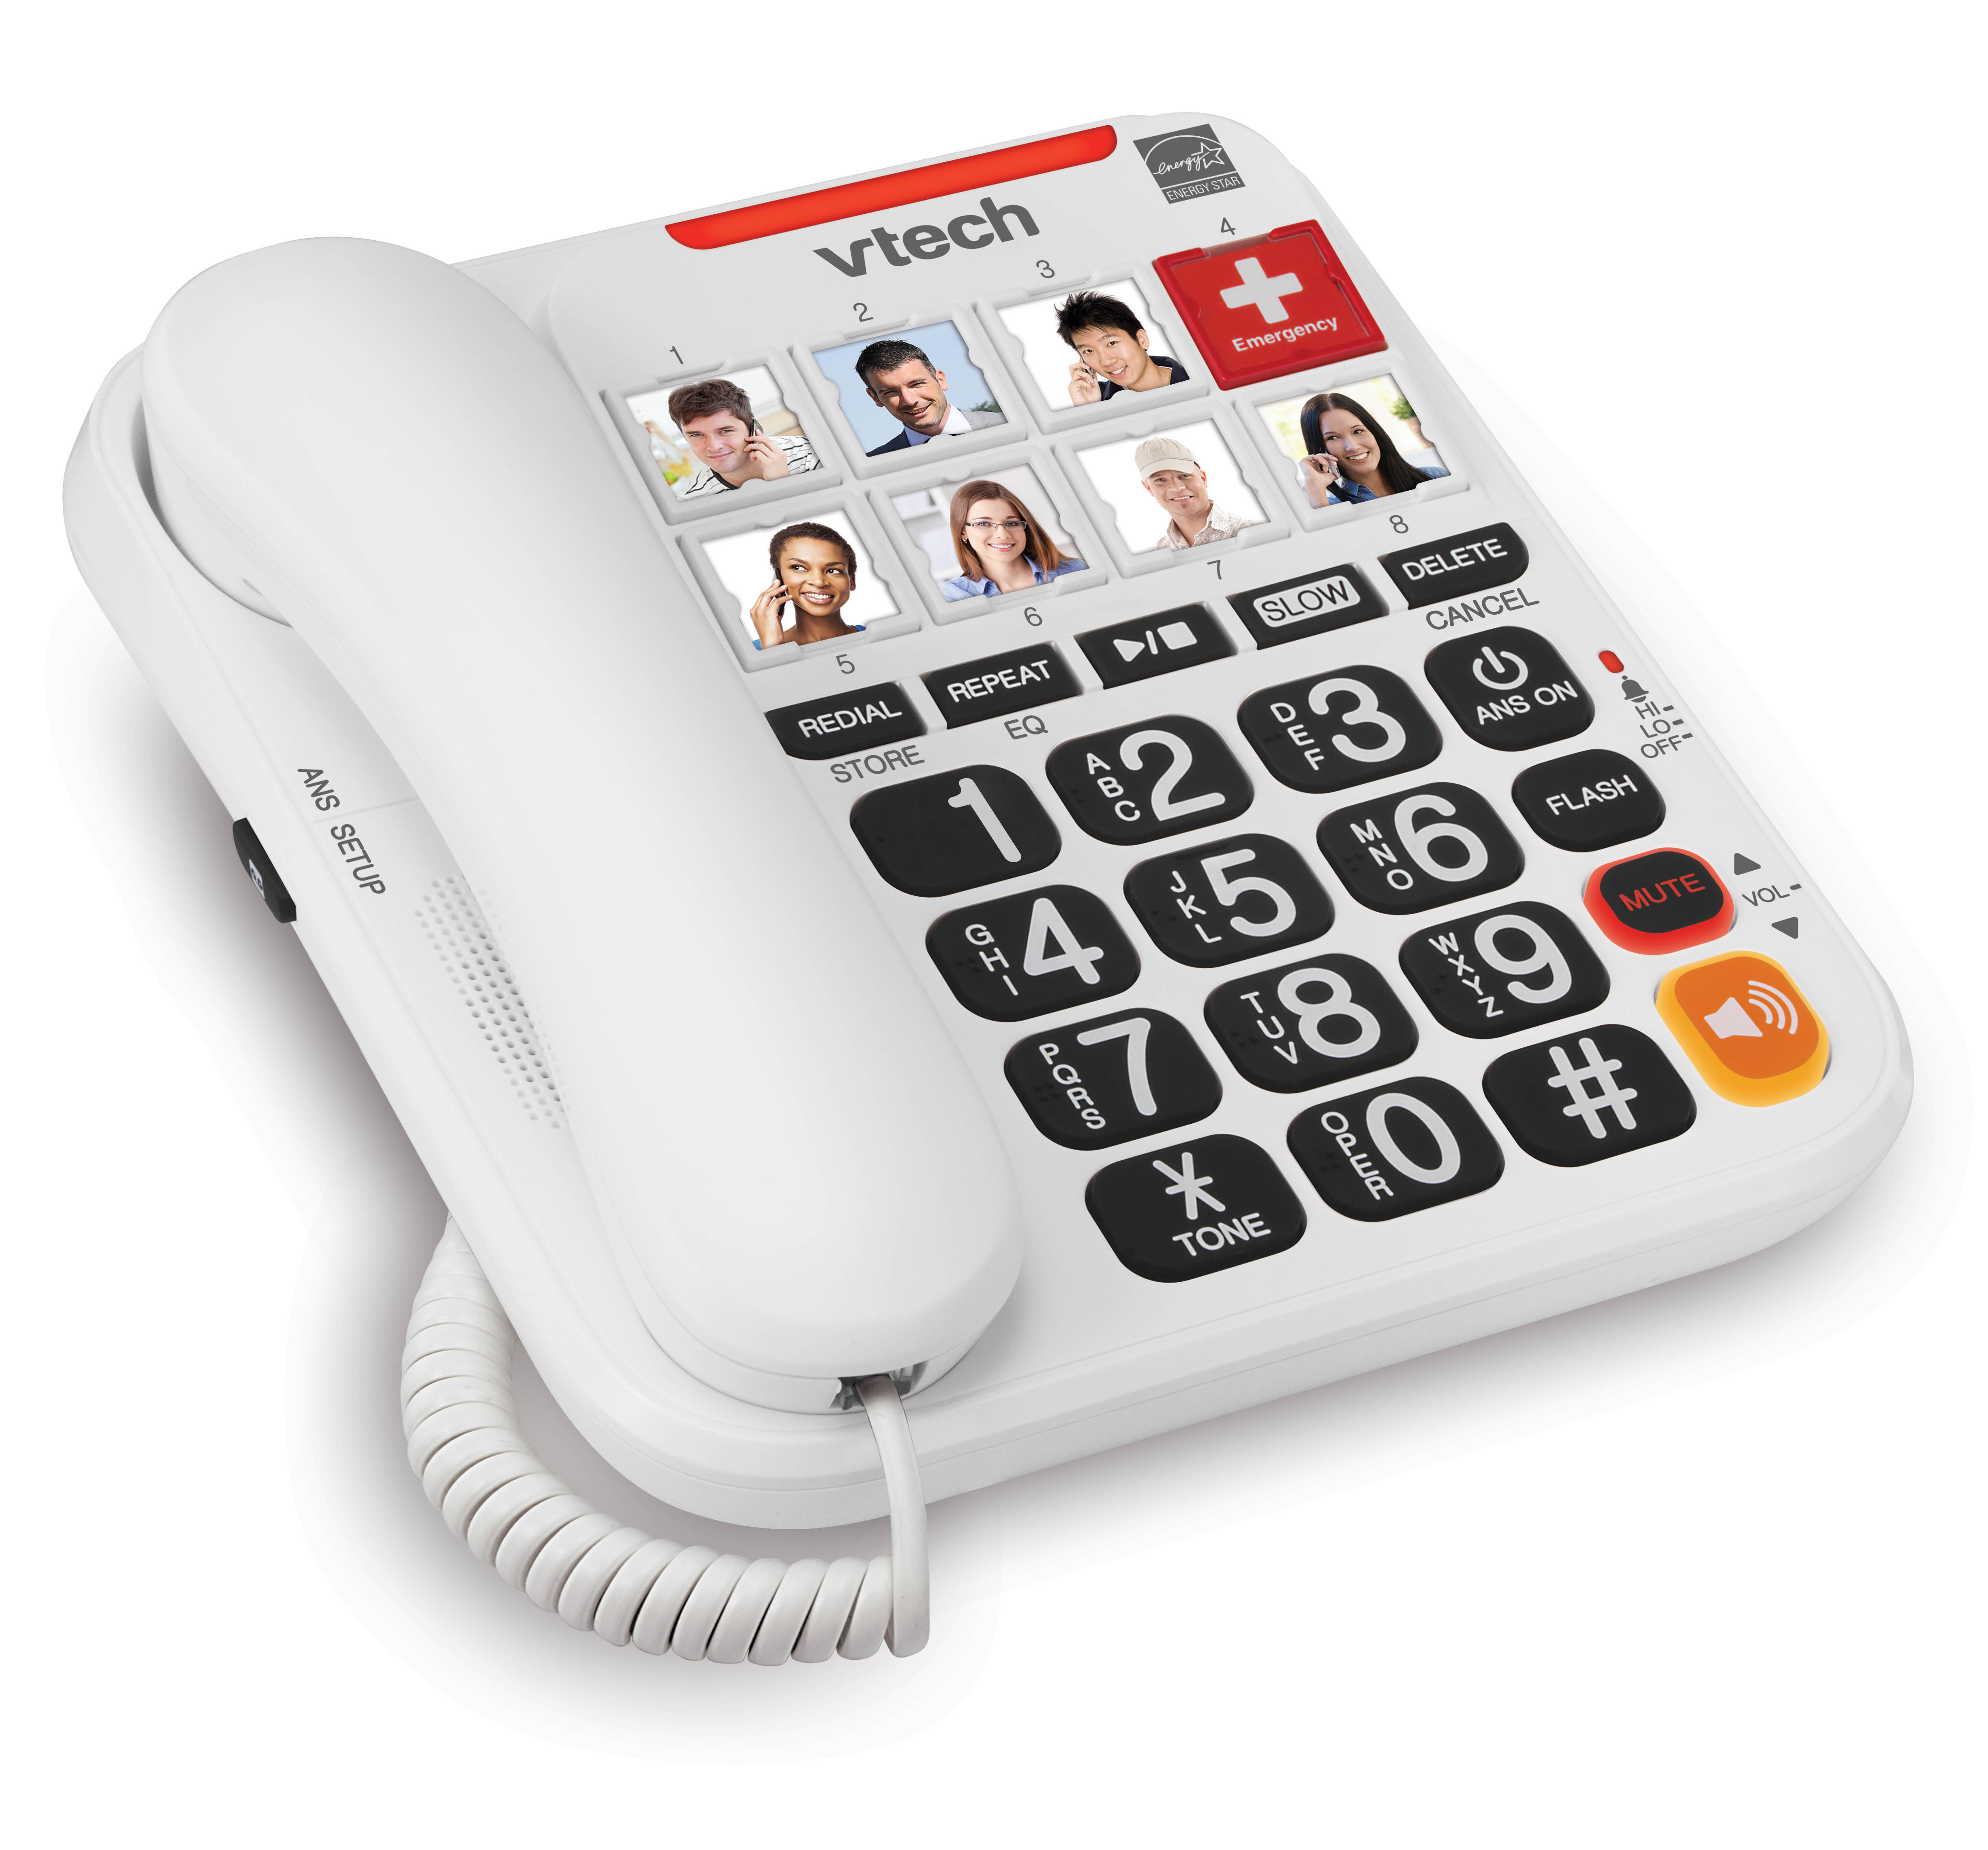 Amplified Corded Answering System with 8 Photo Speed Dial, 90dB Ringer Volume, Oversized High-Contrast buttons, and One-touch Audio Booster up to 40db - view 2